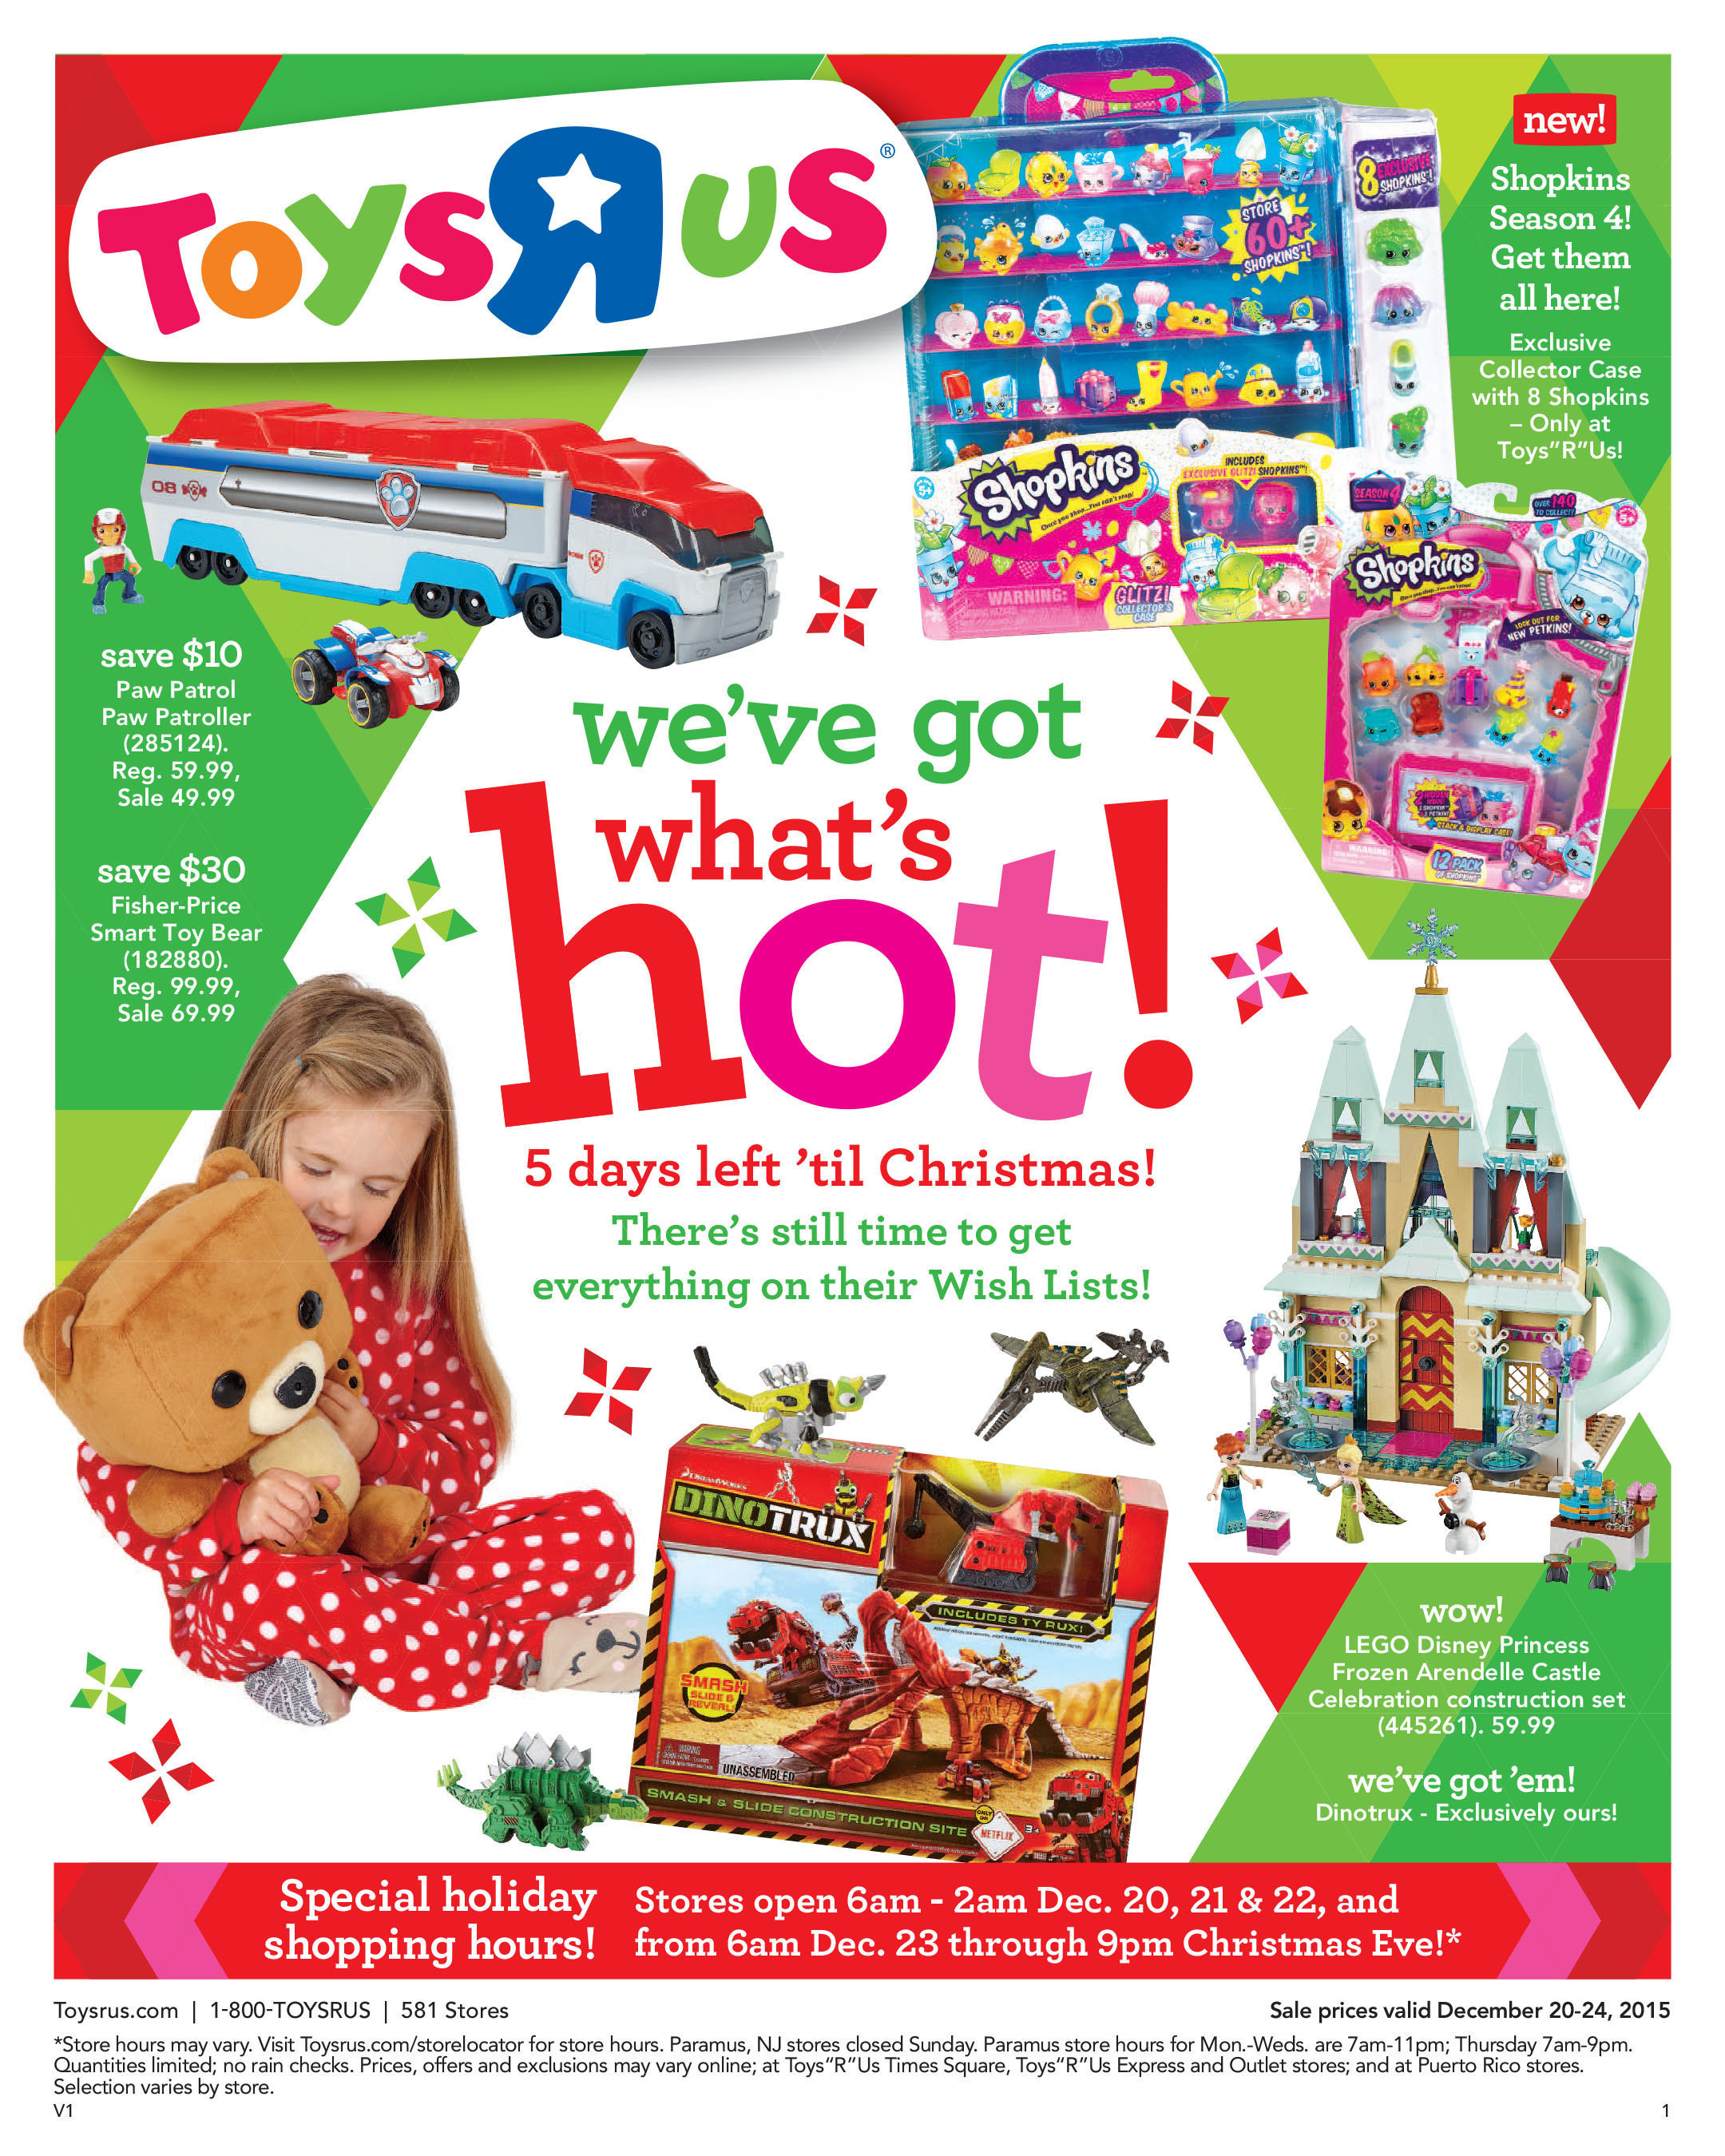 Toys"R"Us offers extended store hours and special savings for last-minute holiday shopping.